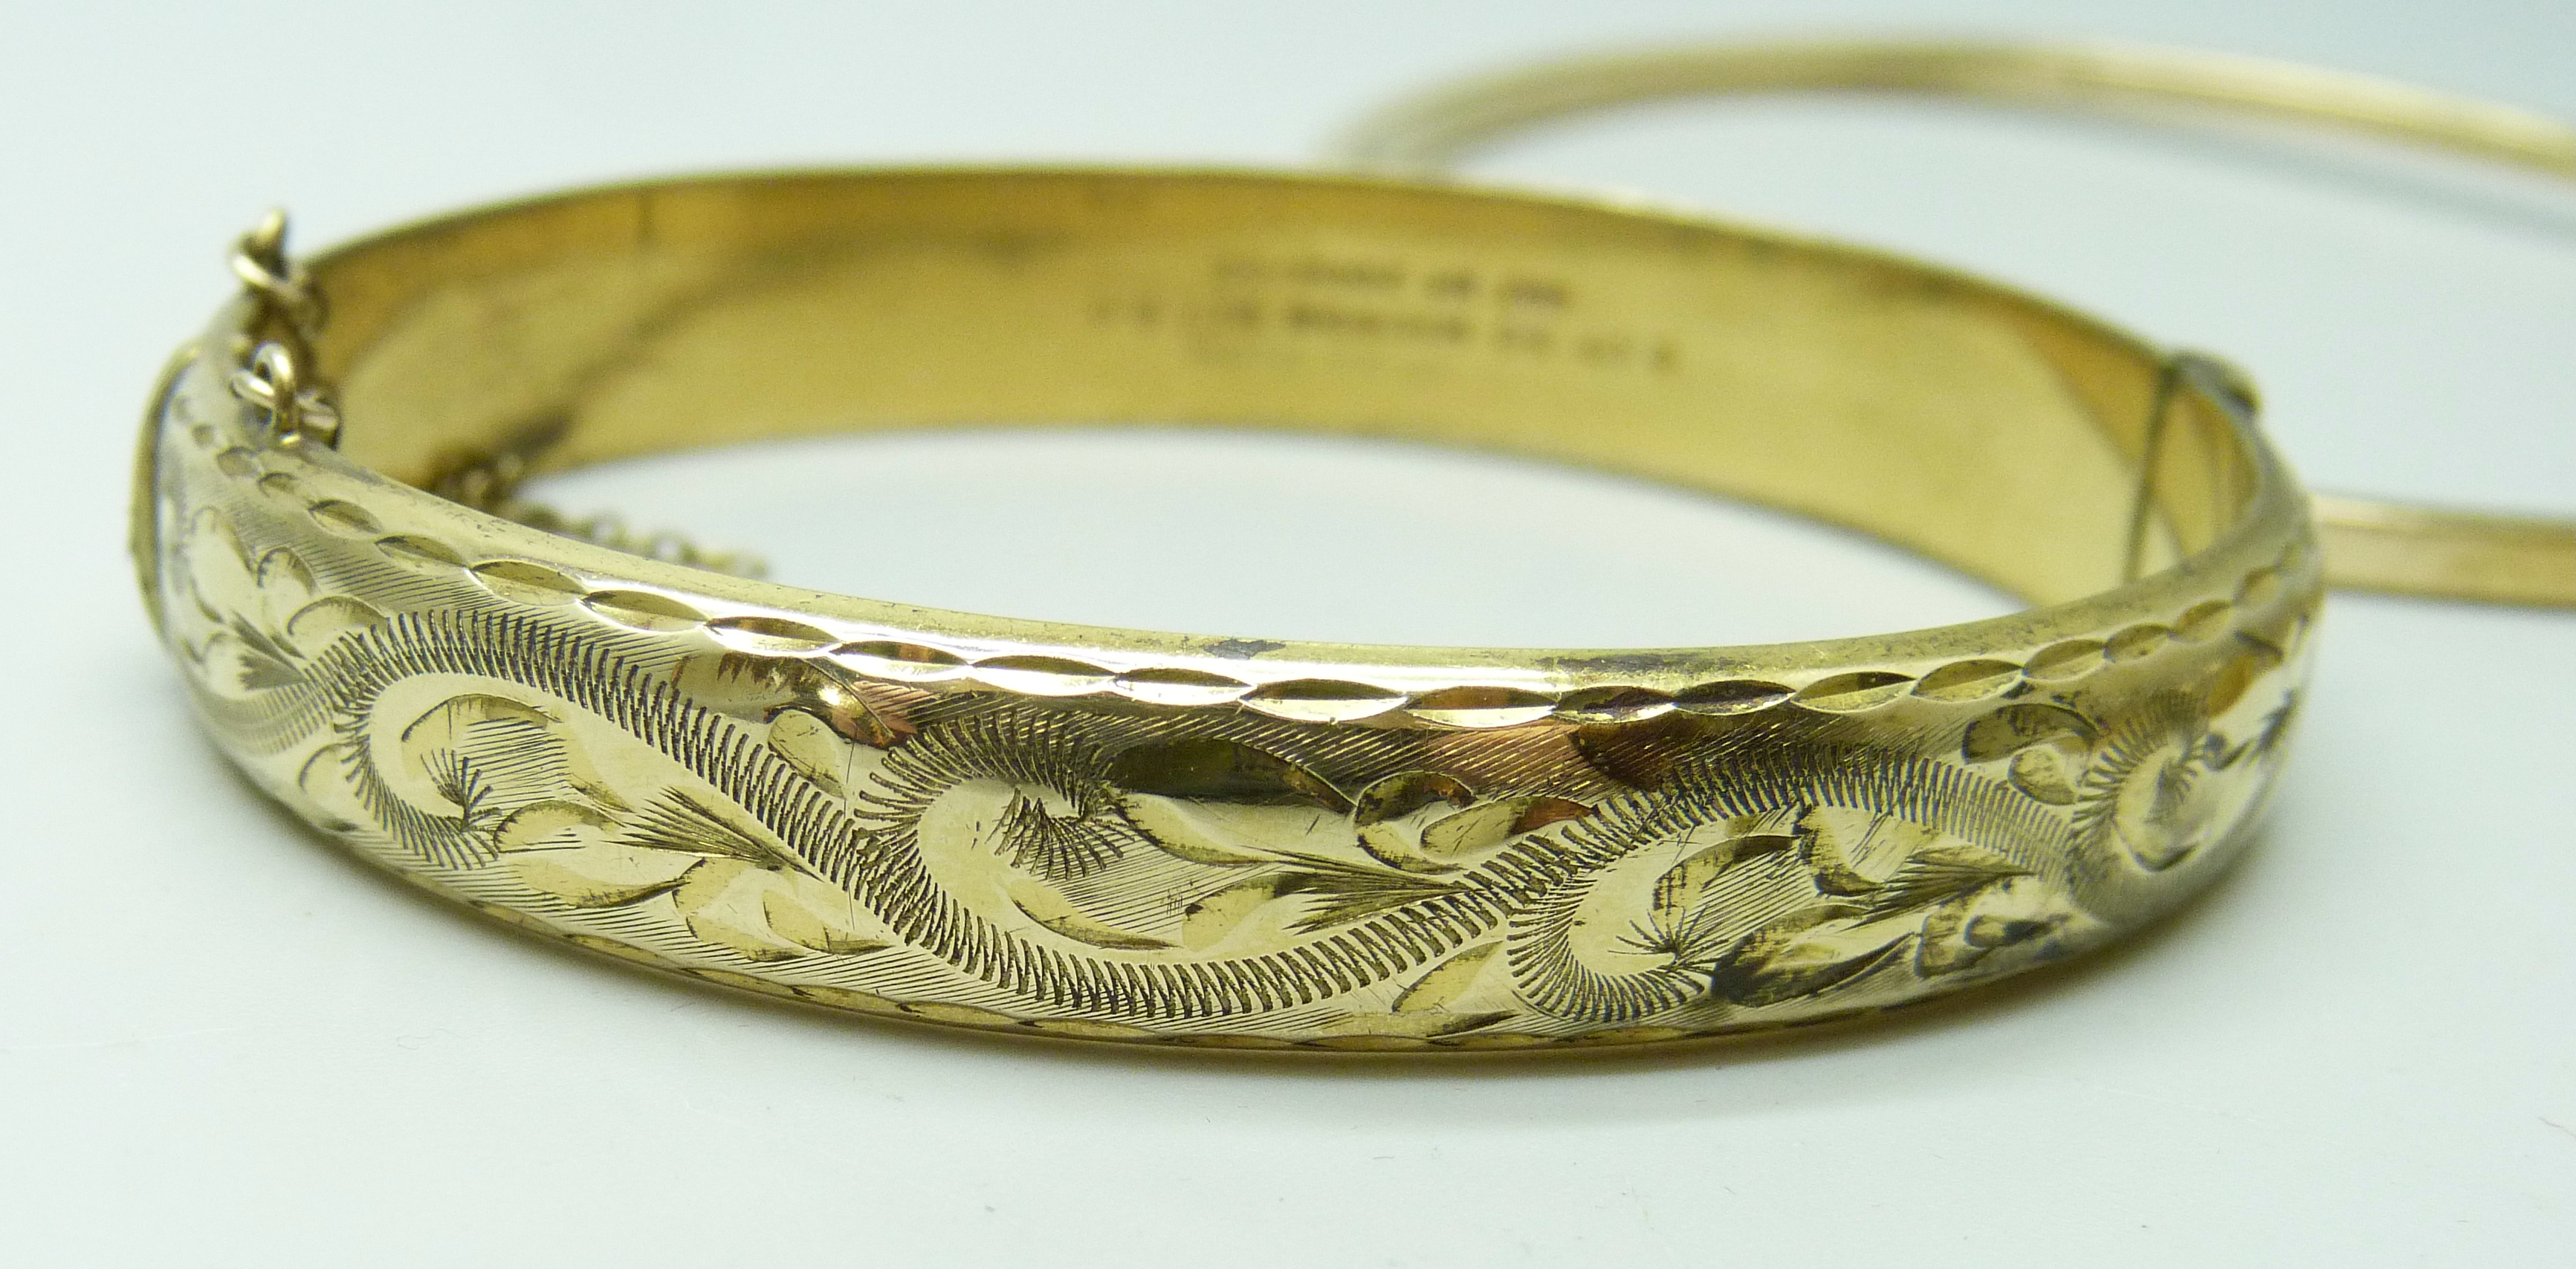 Three vintage rolled gold bangles - Image 2 of 5